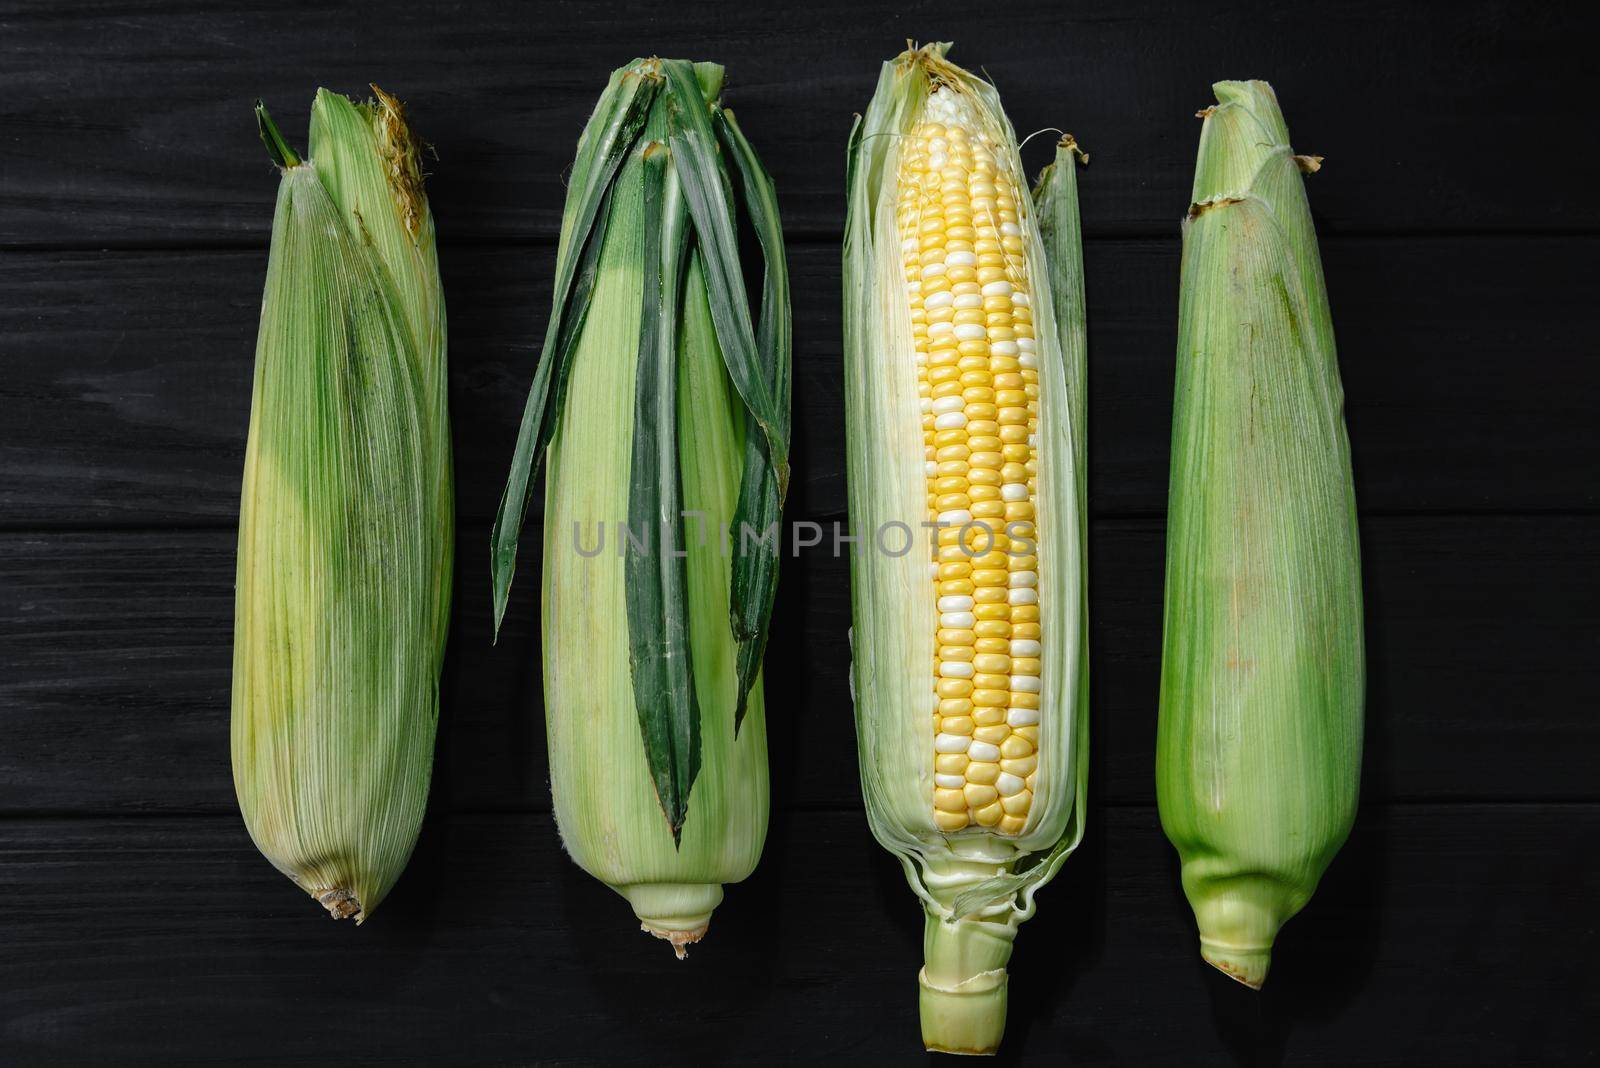 Cobs of ripe raw corn laid out on a table with a dark wooden texture. Healthy summer food concept. Fresh unroasted cob of corn. Background, top view, close-up, flat plan, copy space